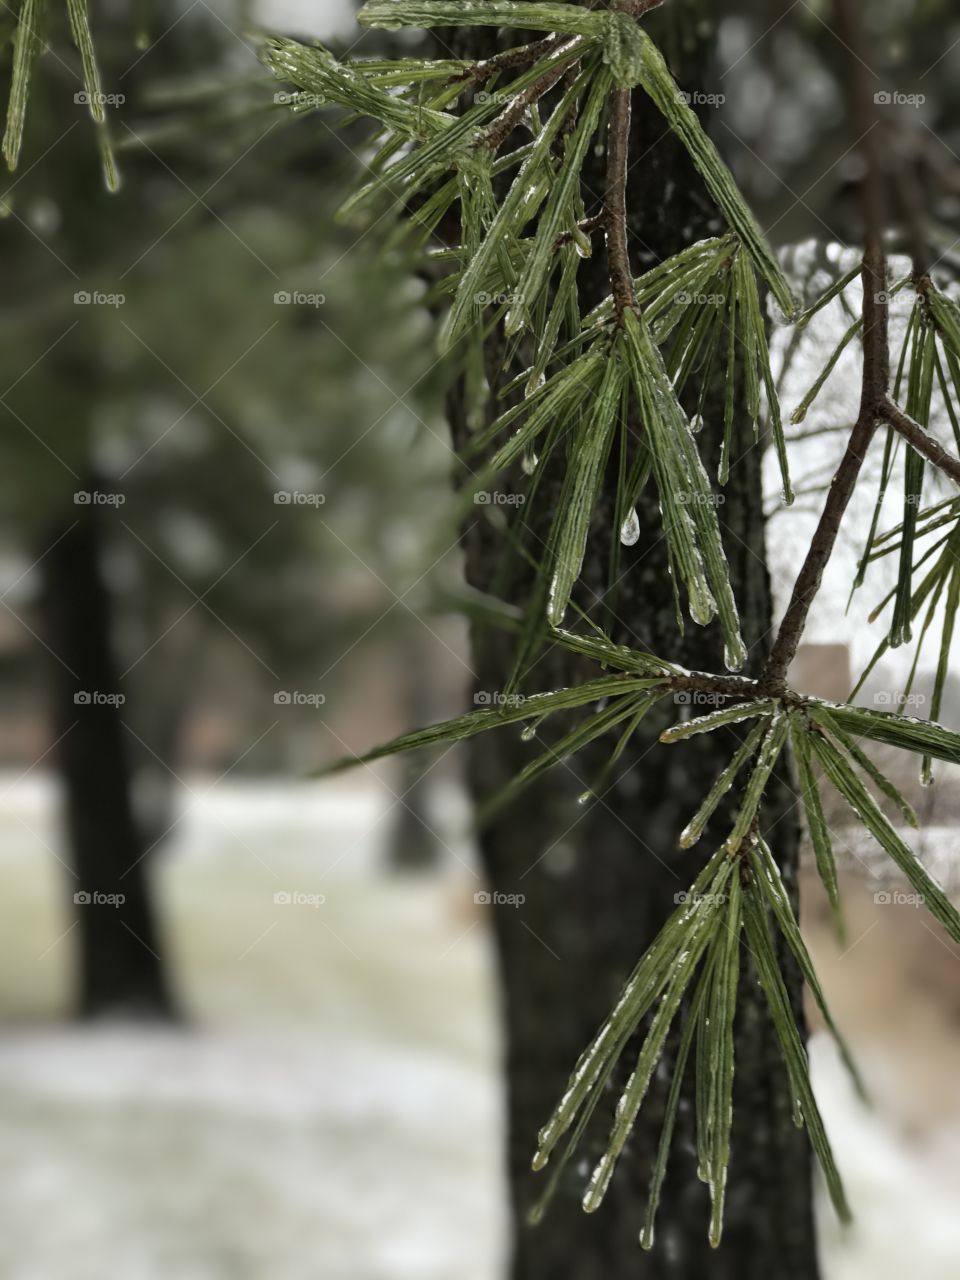 Green pine needles covered in a layer of ice after freezing rain in the middle of the winter season